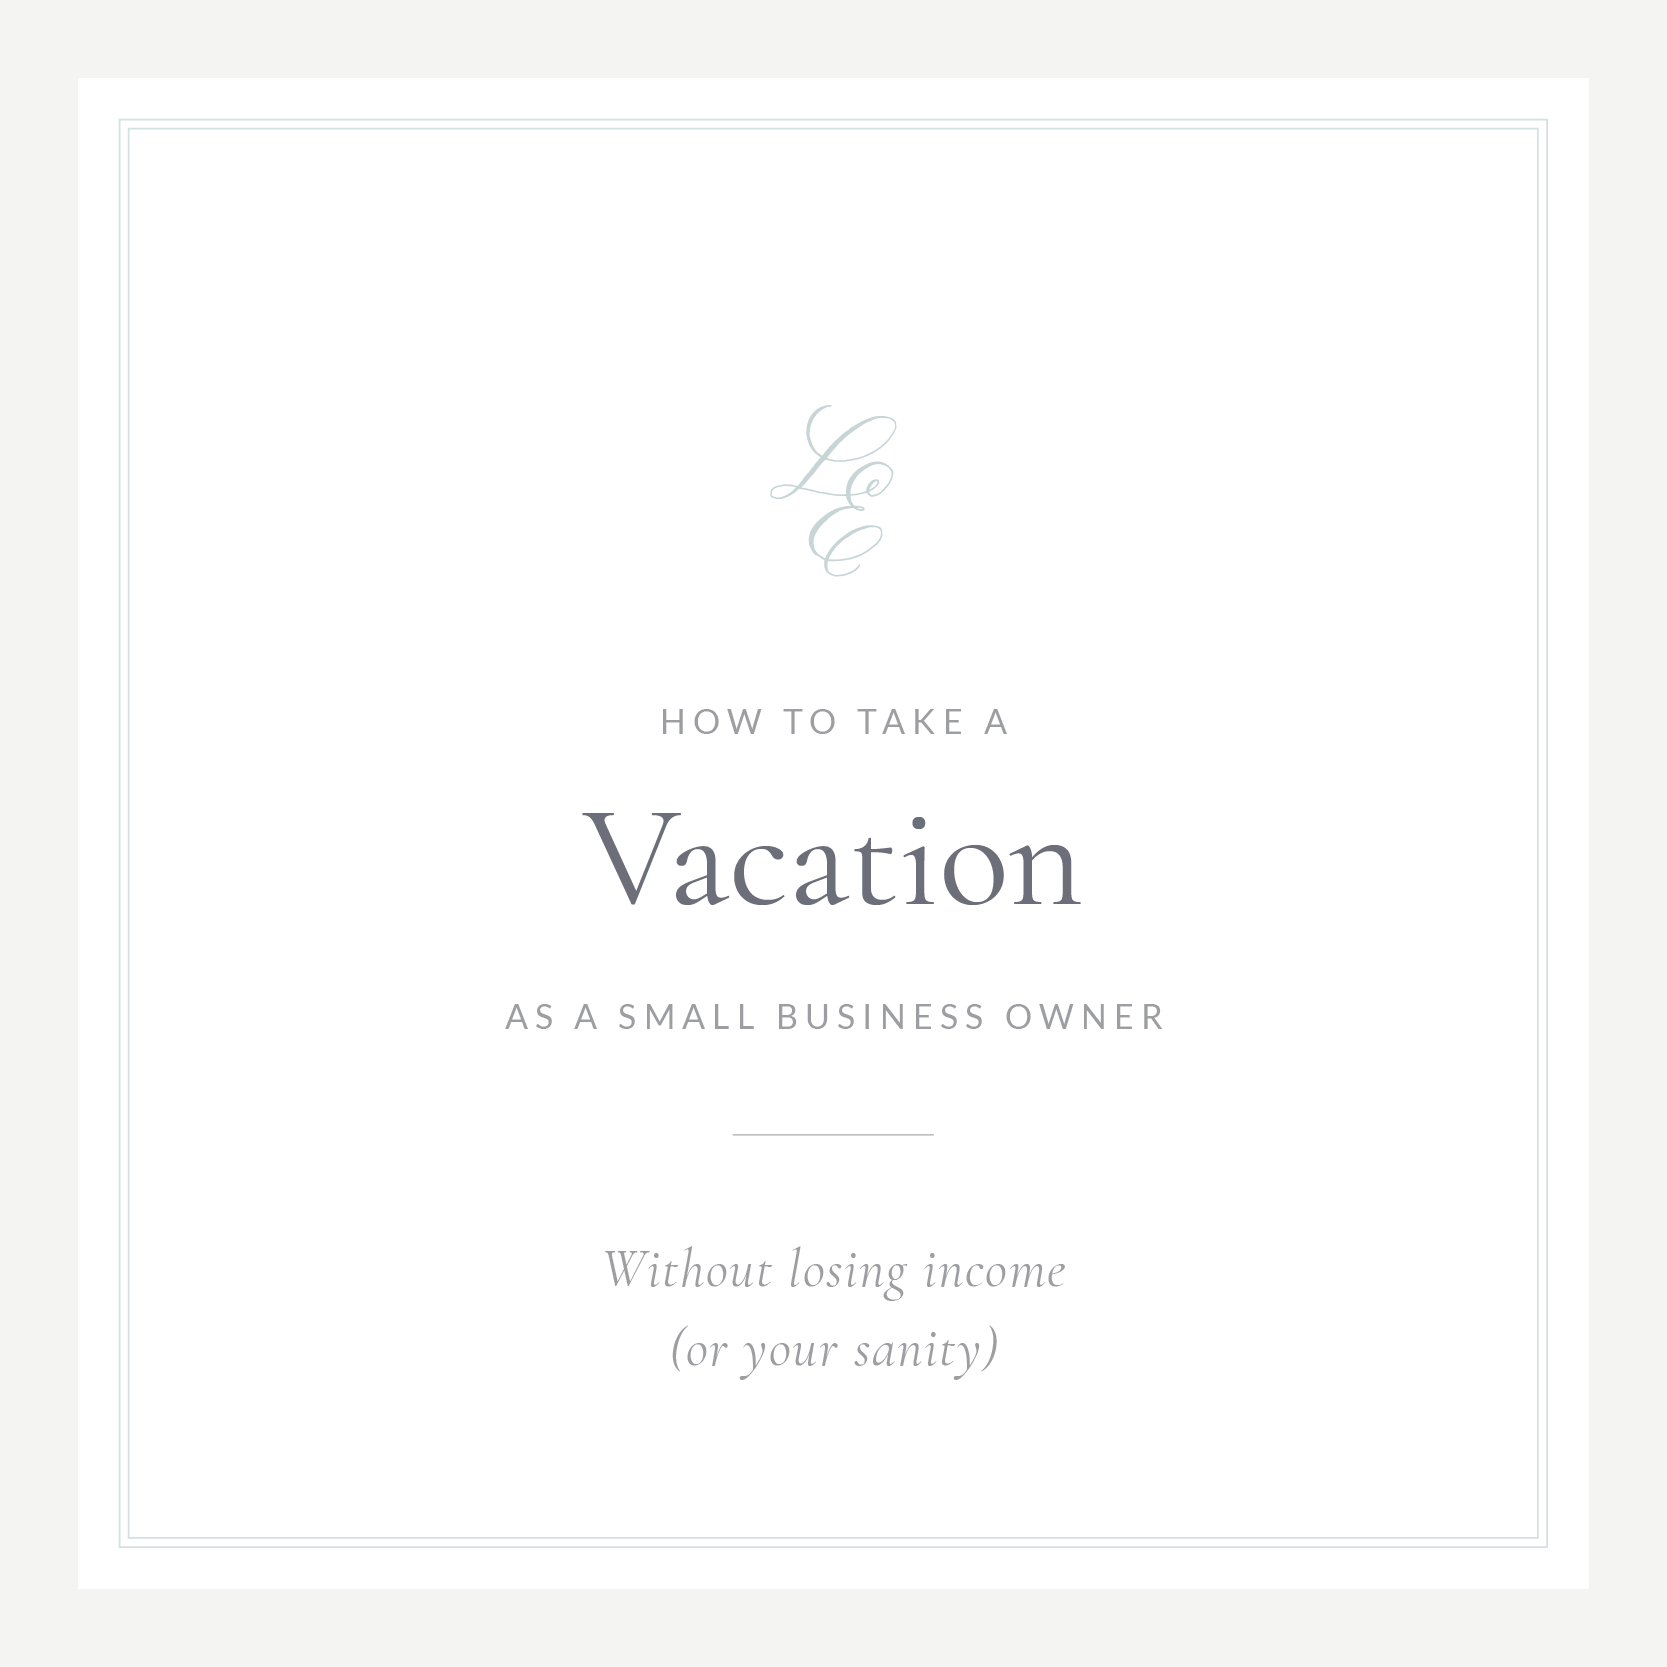 Small Business Owner Vacation | How to Take a Vacation as a Small Business Owner - Laylee Emadi